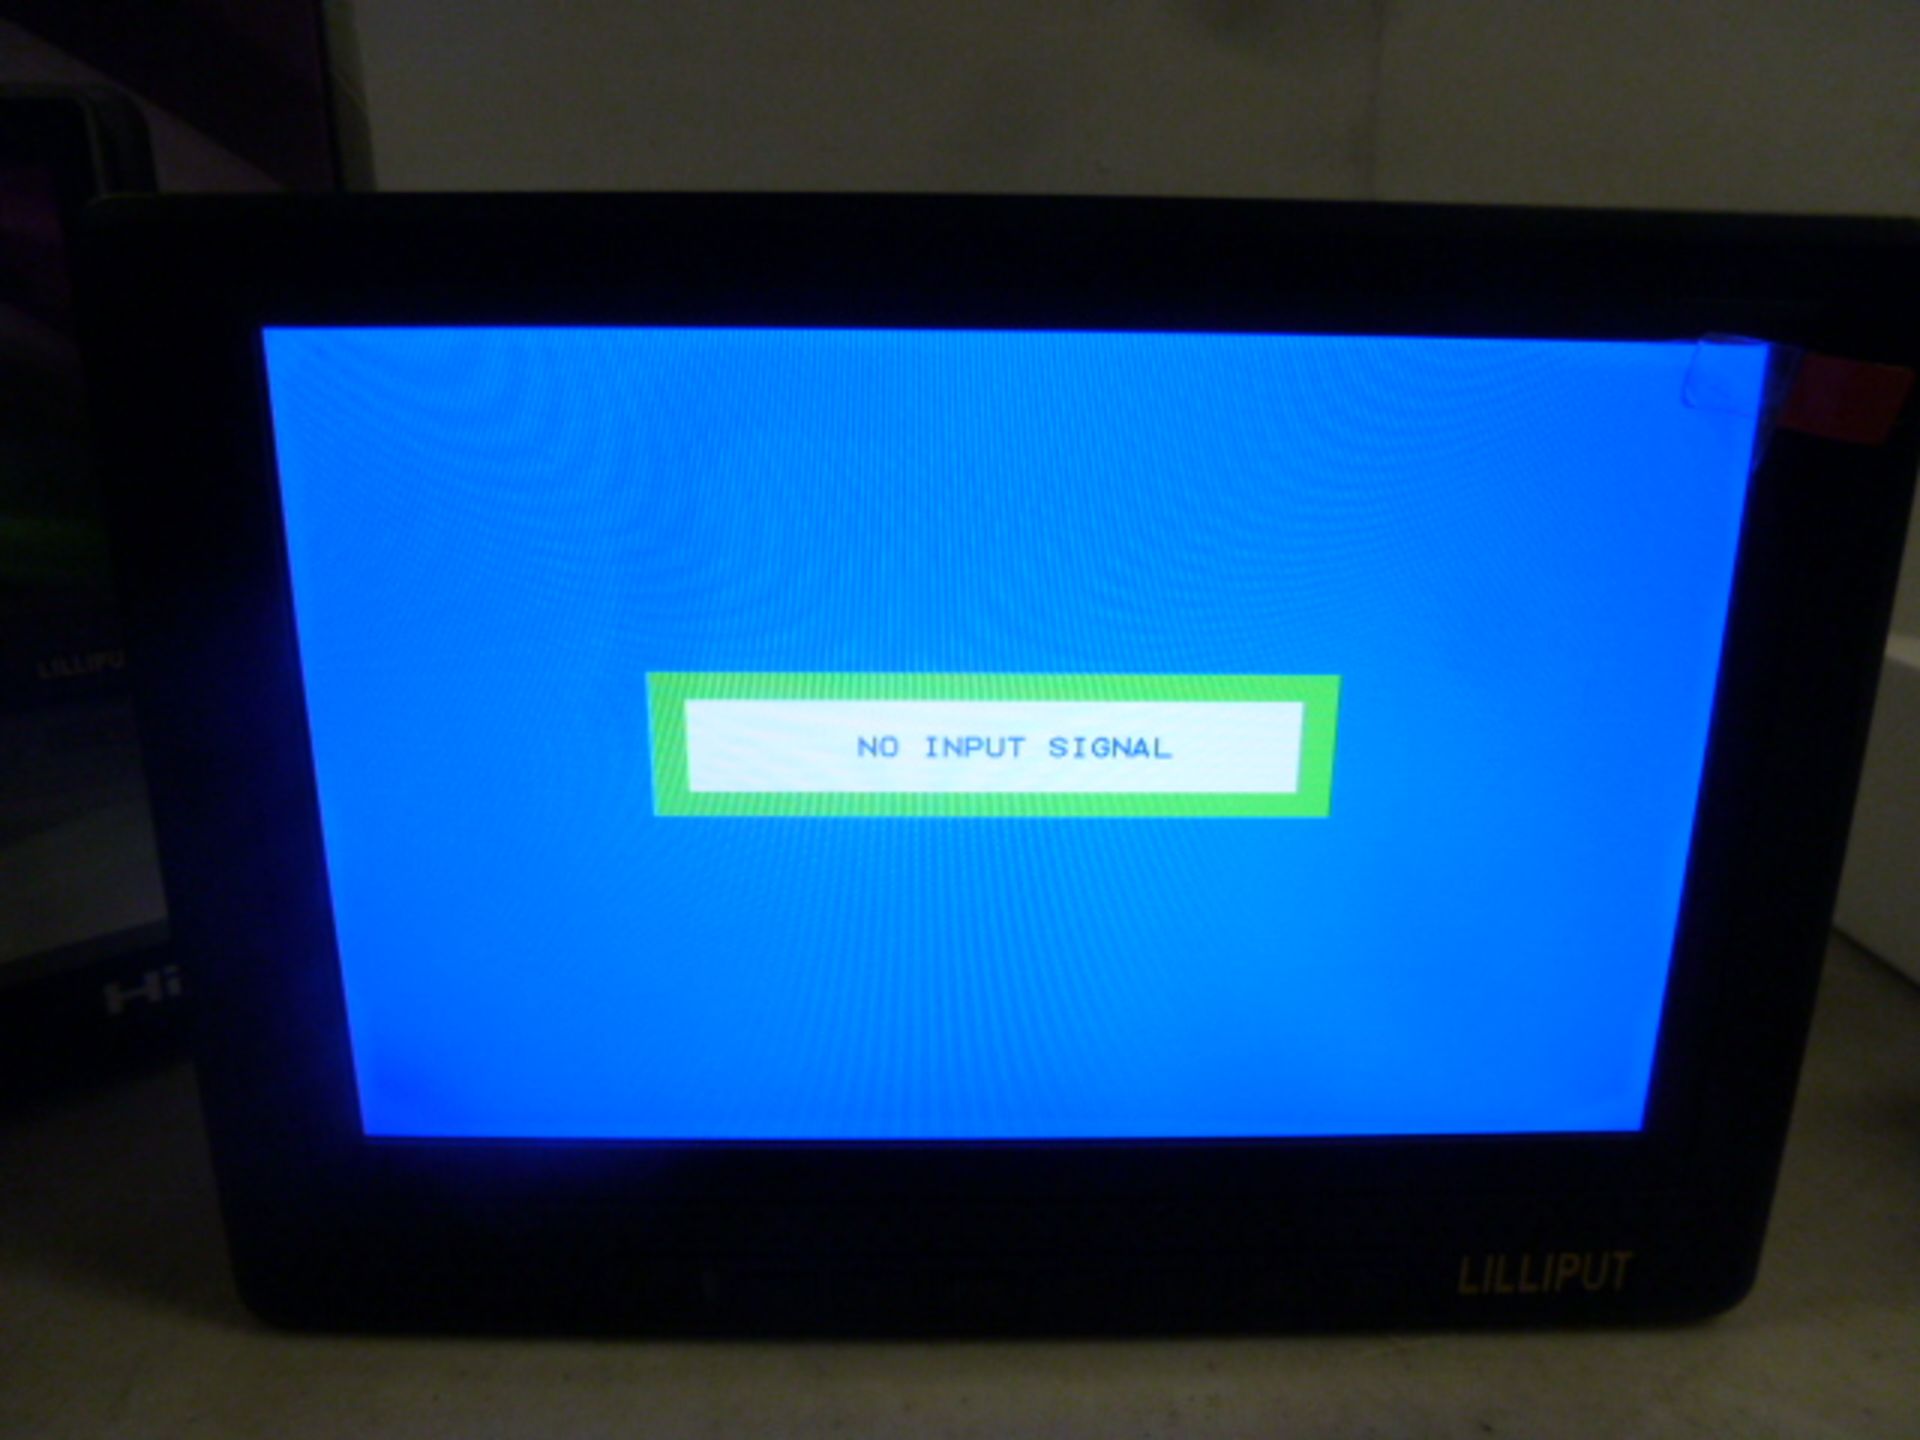 Lilliput 7" LCD Field Monitor with HDMI Input, Model 668GL-70NP. Boxed As New. - Image 3 of 6